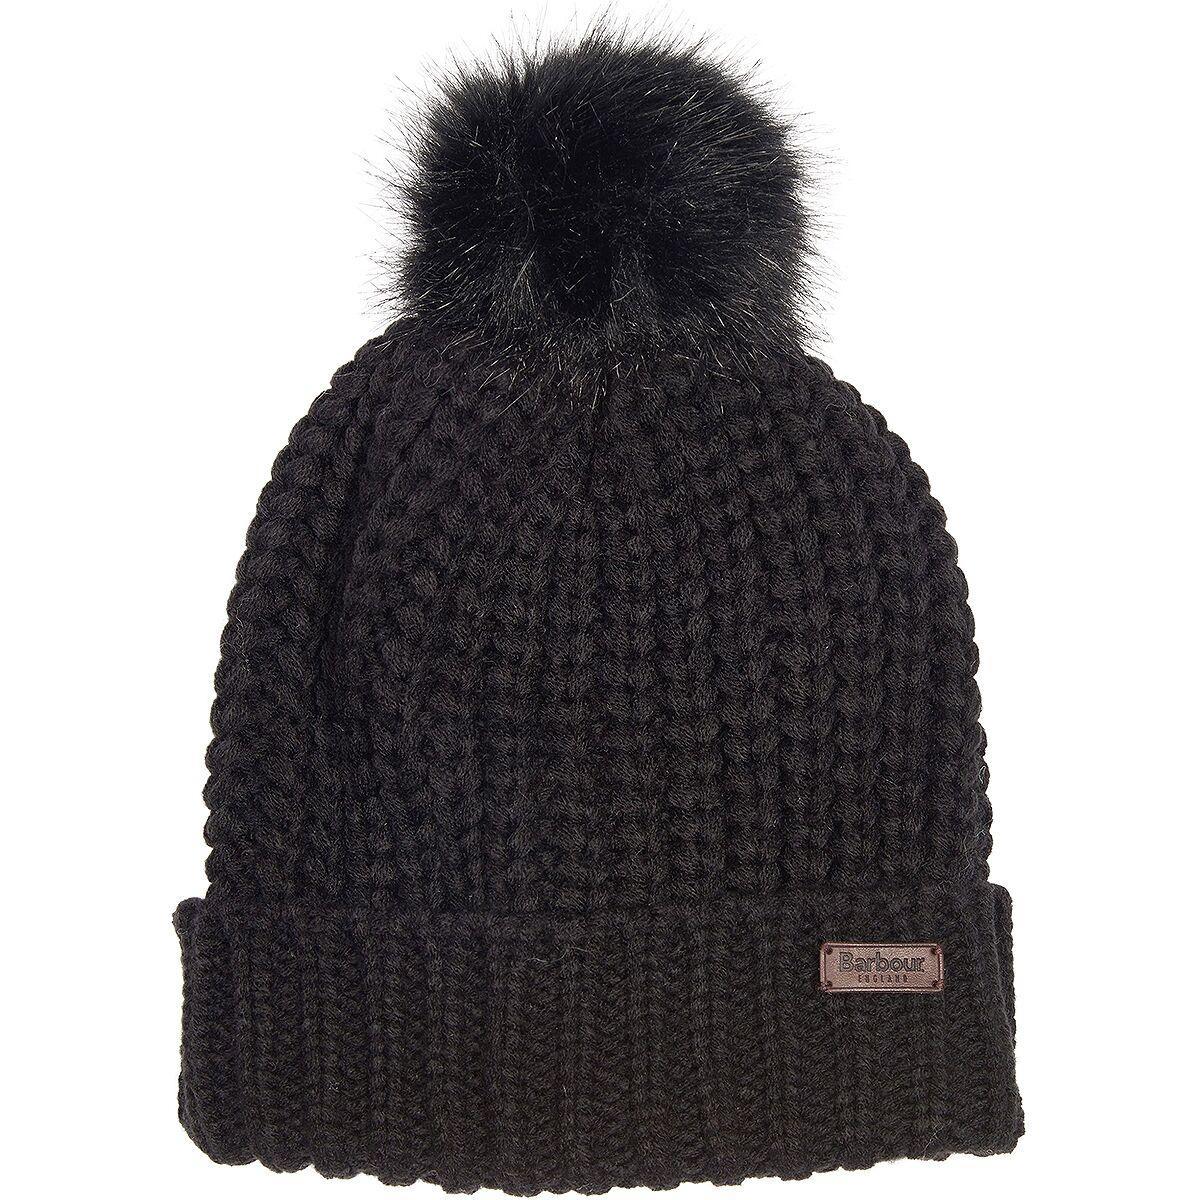 Barbour Saltburn Knit Beanie with Faux Fur Pom Product Image